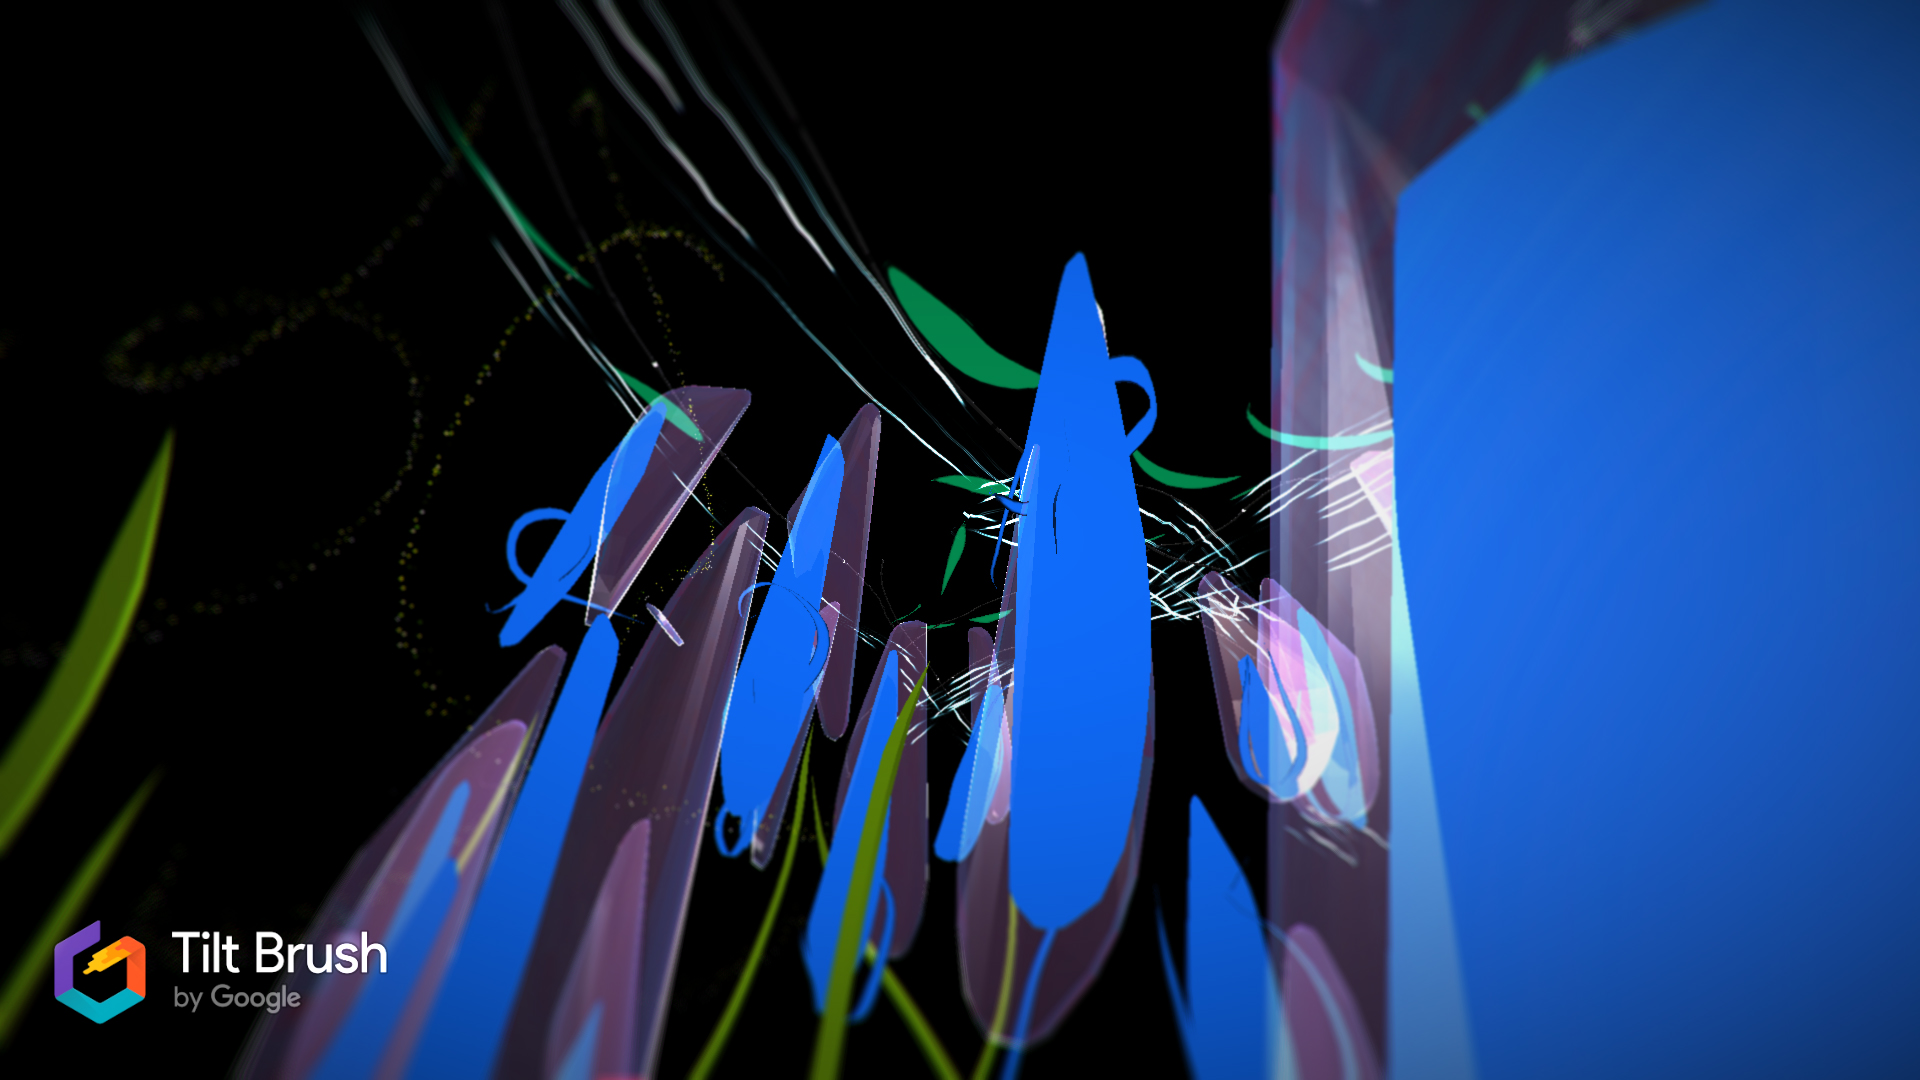 A dark field shows floating elliptical blue shapes. Streaks of green light stretch above the blue shapes. Tilt Brush by Google logo is in the bottom right hand corner.